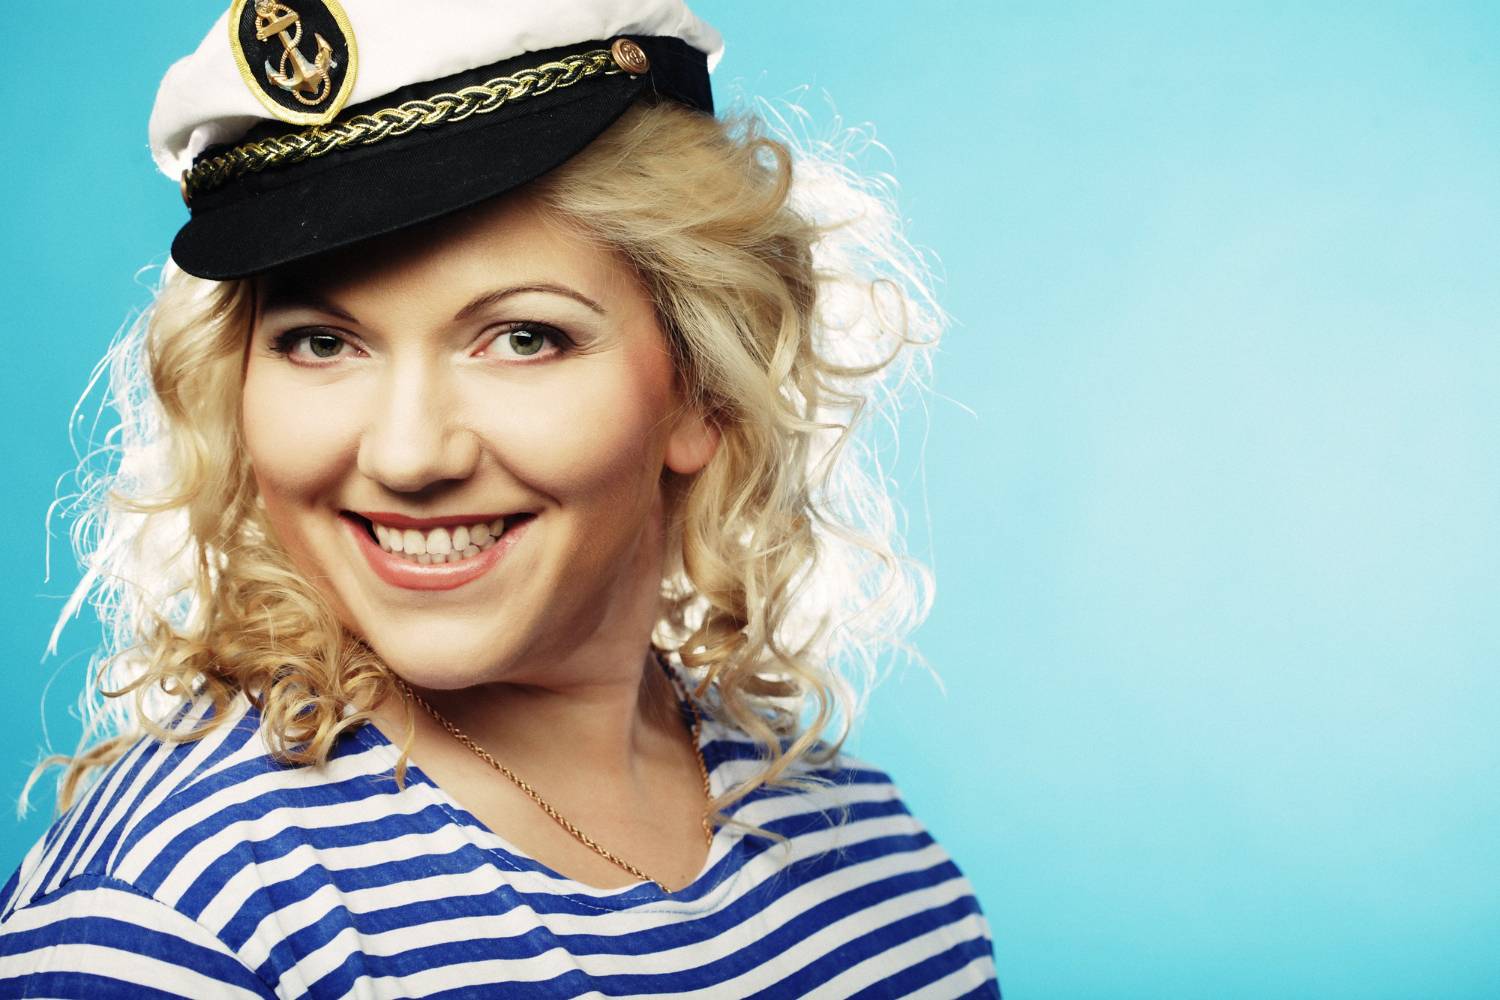 Smiling woman in sailor hat, ideal for 10 person pontoon boats.